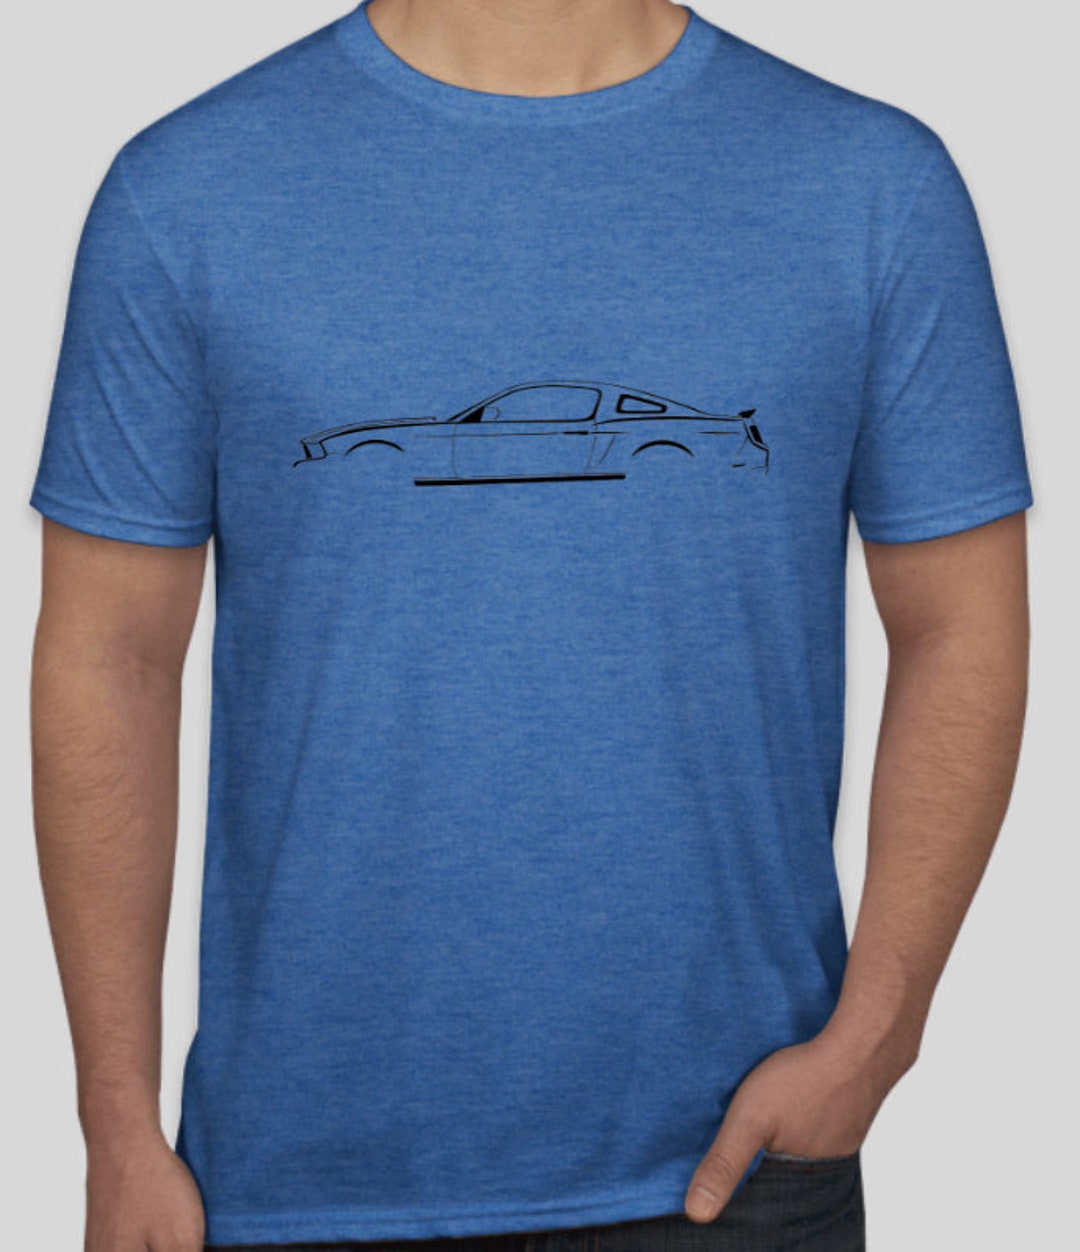 Design Silhouette Shirt S197 Mustang COLOR Black T Etsy CHOOSE Your -